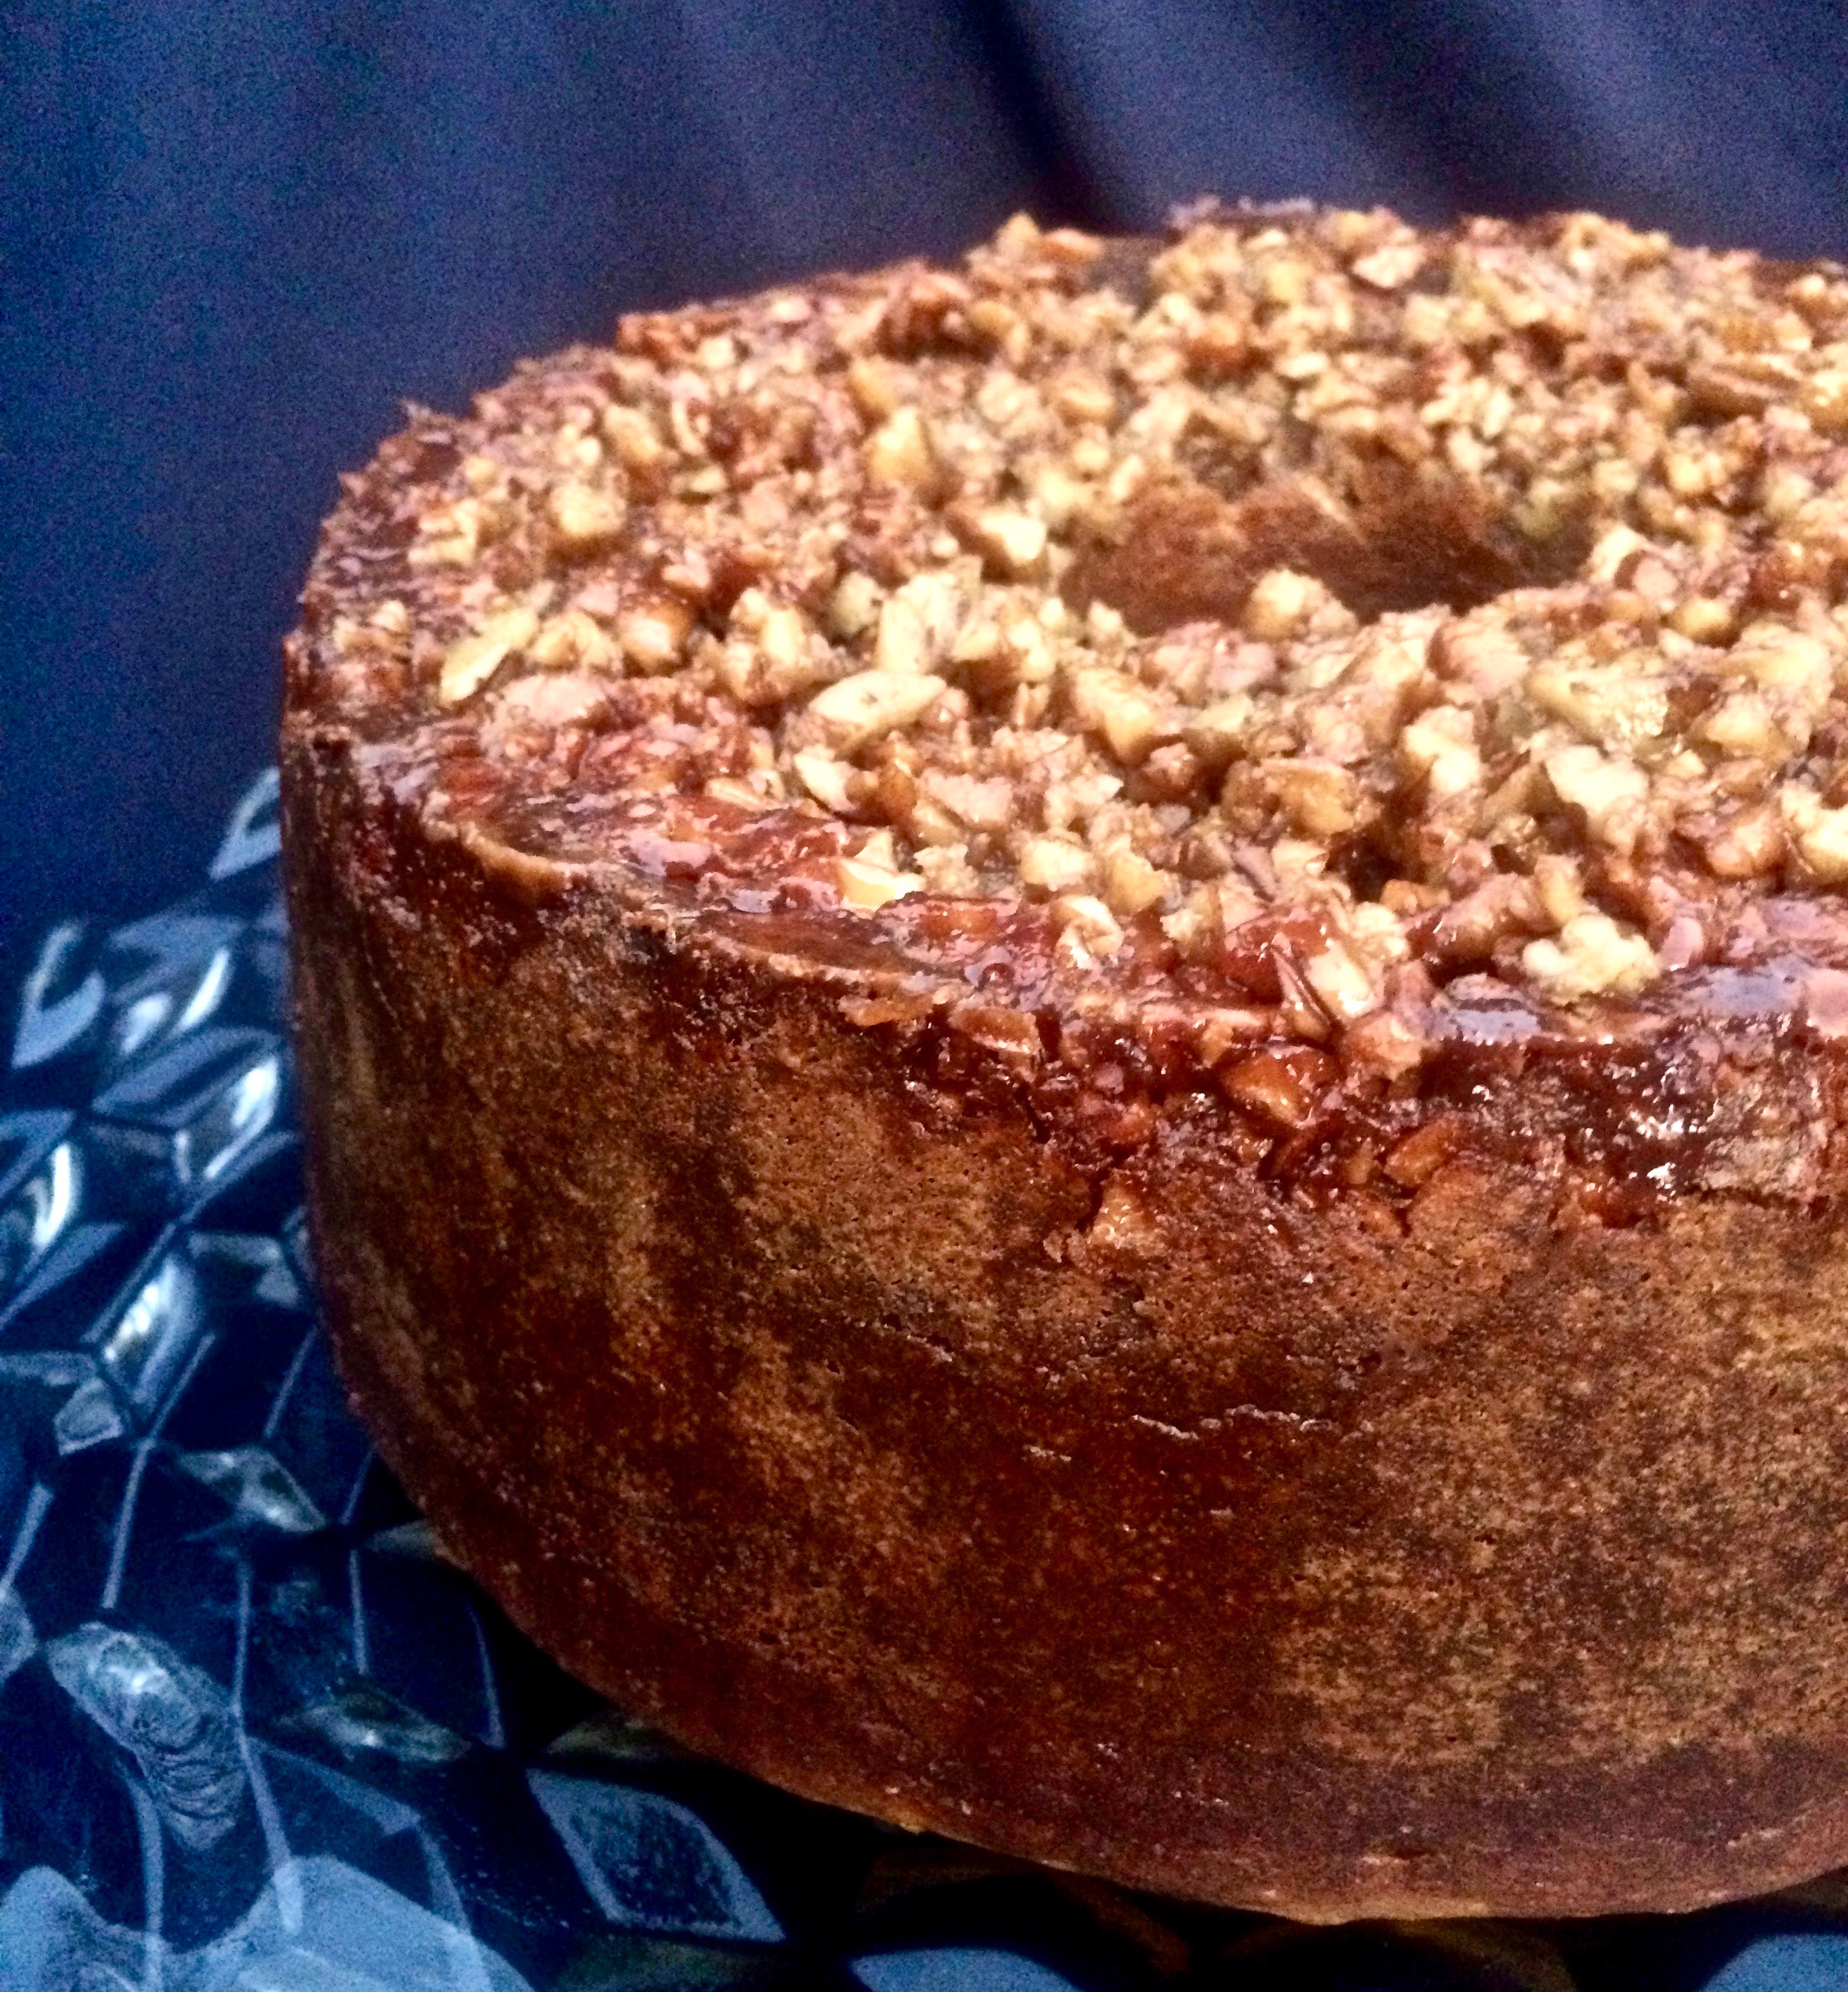 "If you love sweet potatoes, try this cake recipe enriched with a little bourbon and sweetened with maple syrup, plus the crunch of pecans," says Bibi.
                          